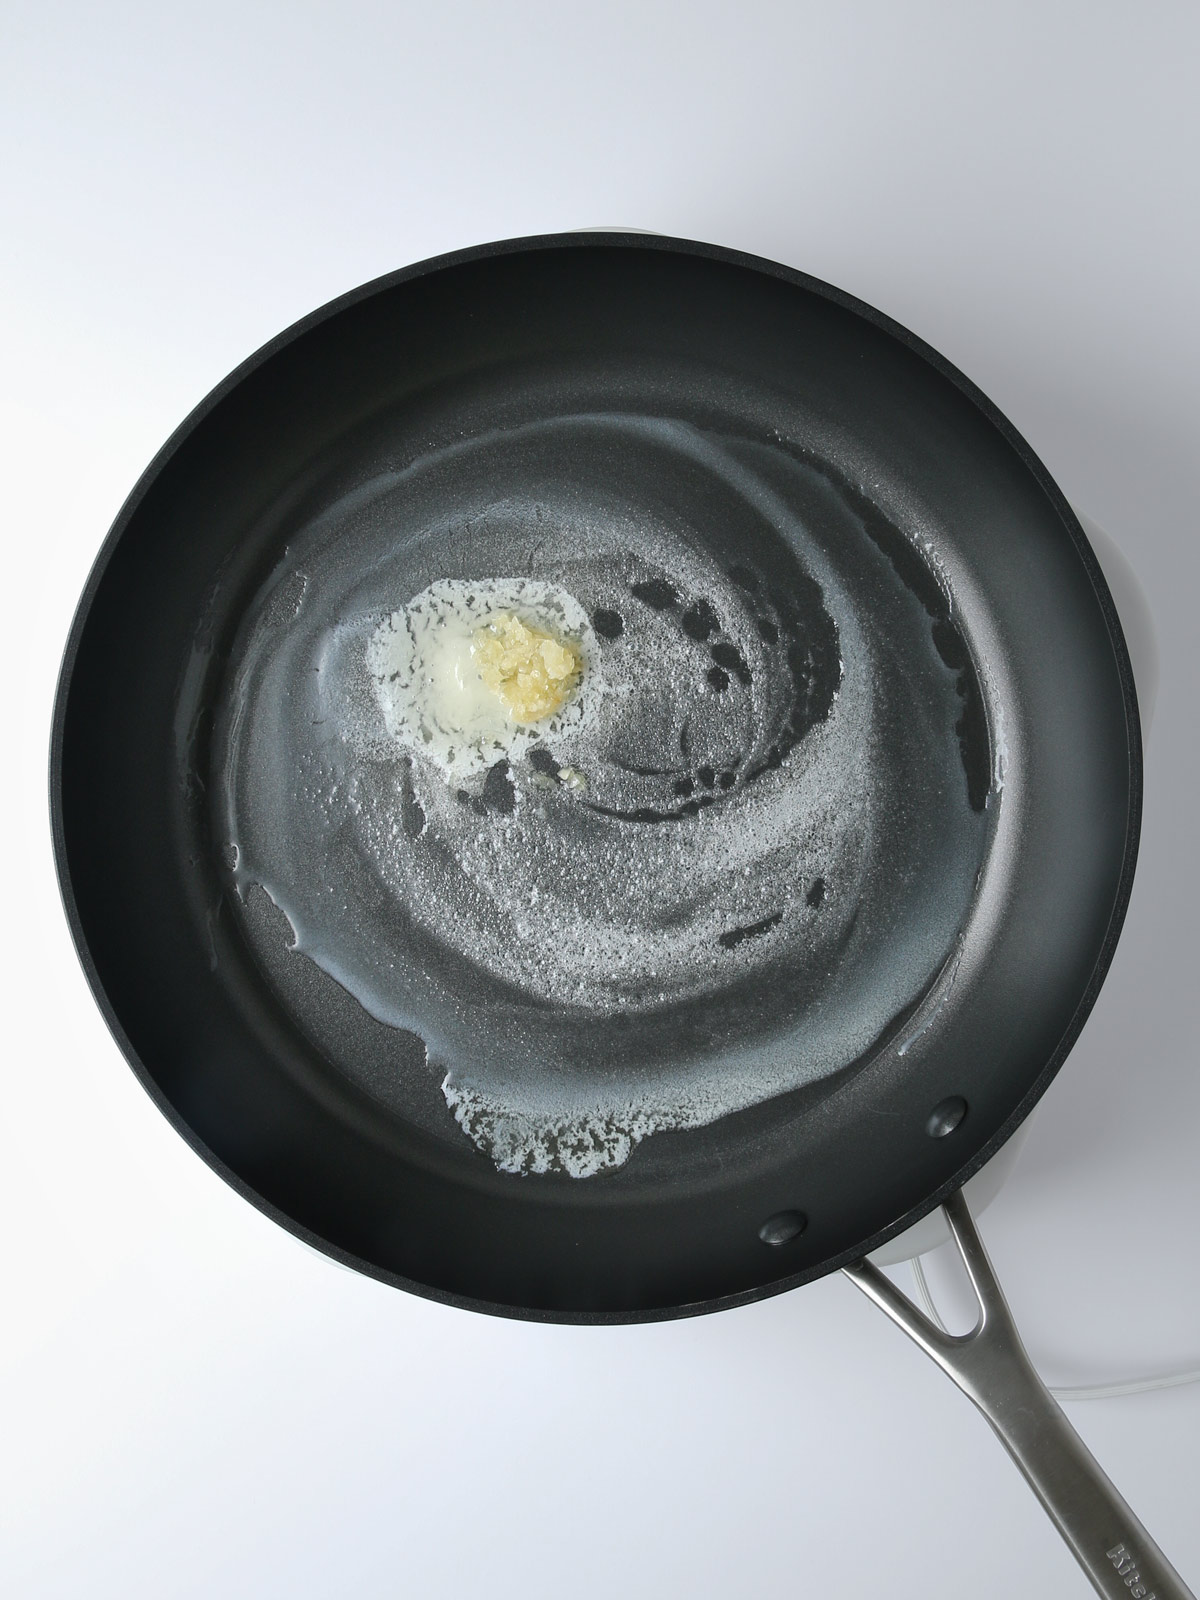 melting butter with garlic in a skillet.